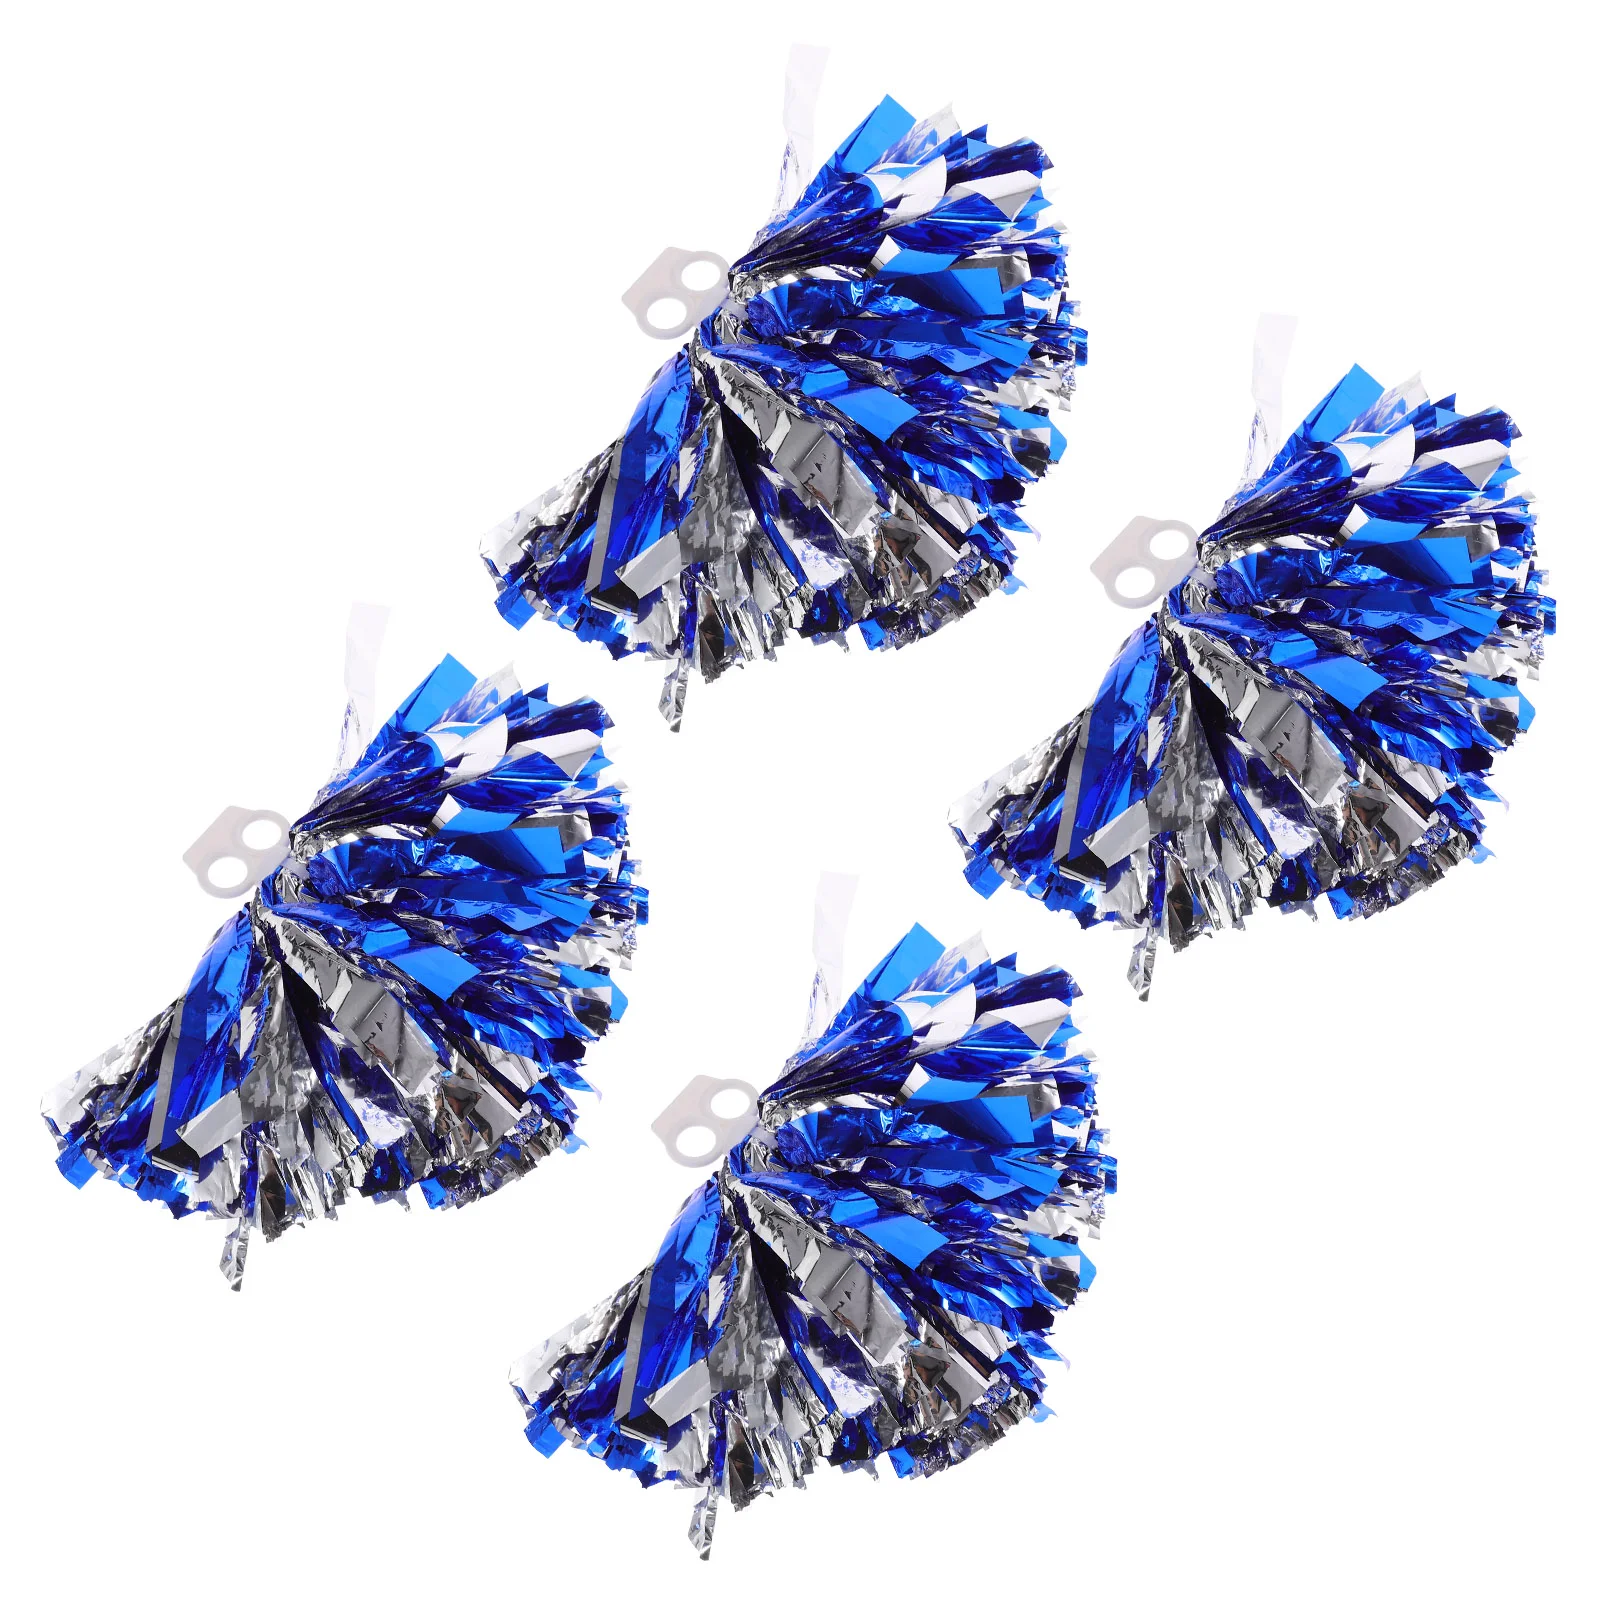 

4 Pcs Cheerleading Flower Ball Handle Cheering Props Flowers Reusable Cheerleader Pom Poms Compact Delicate Pompom Portable